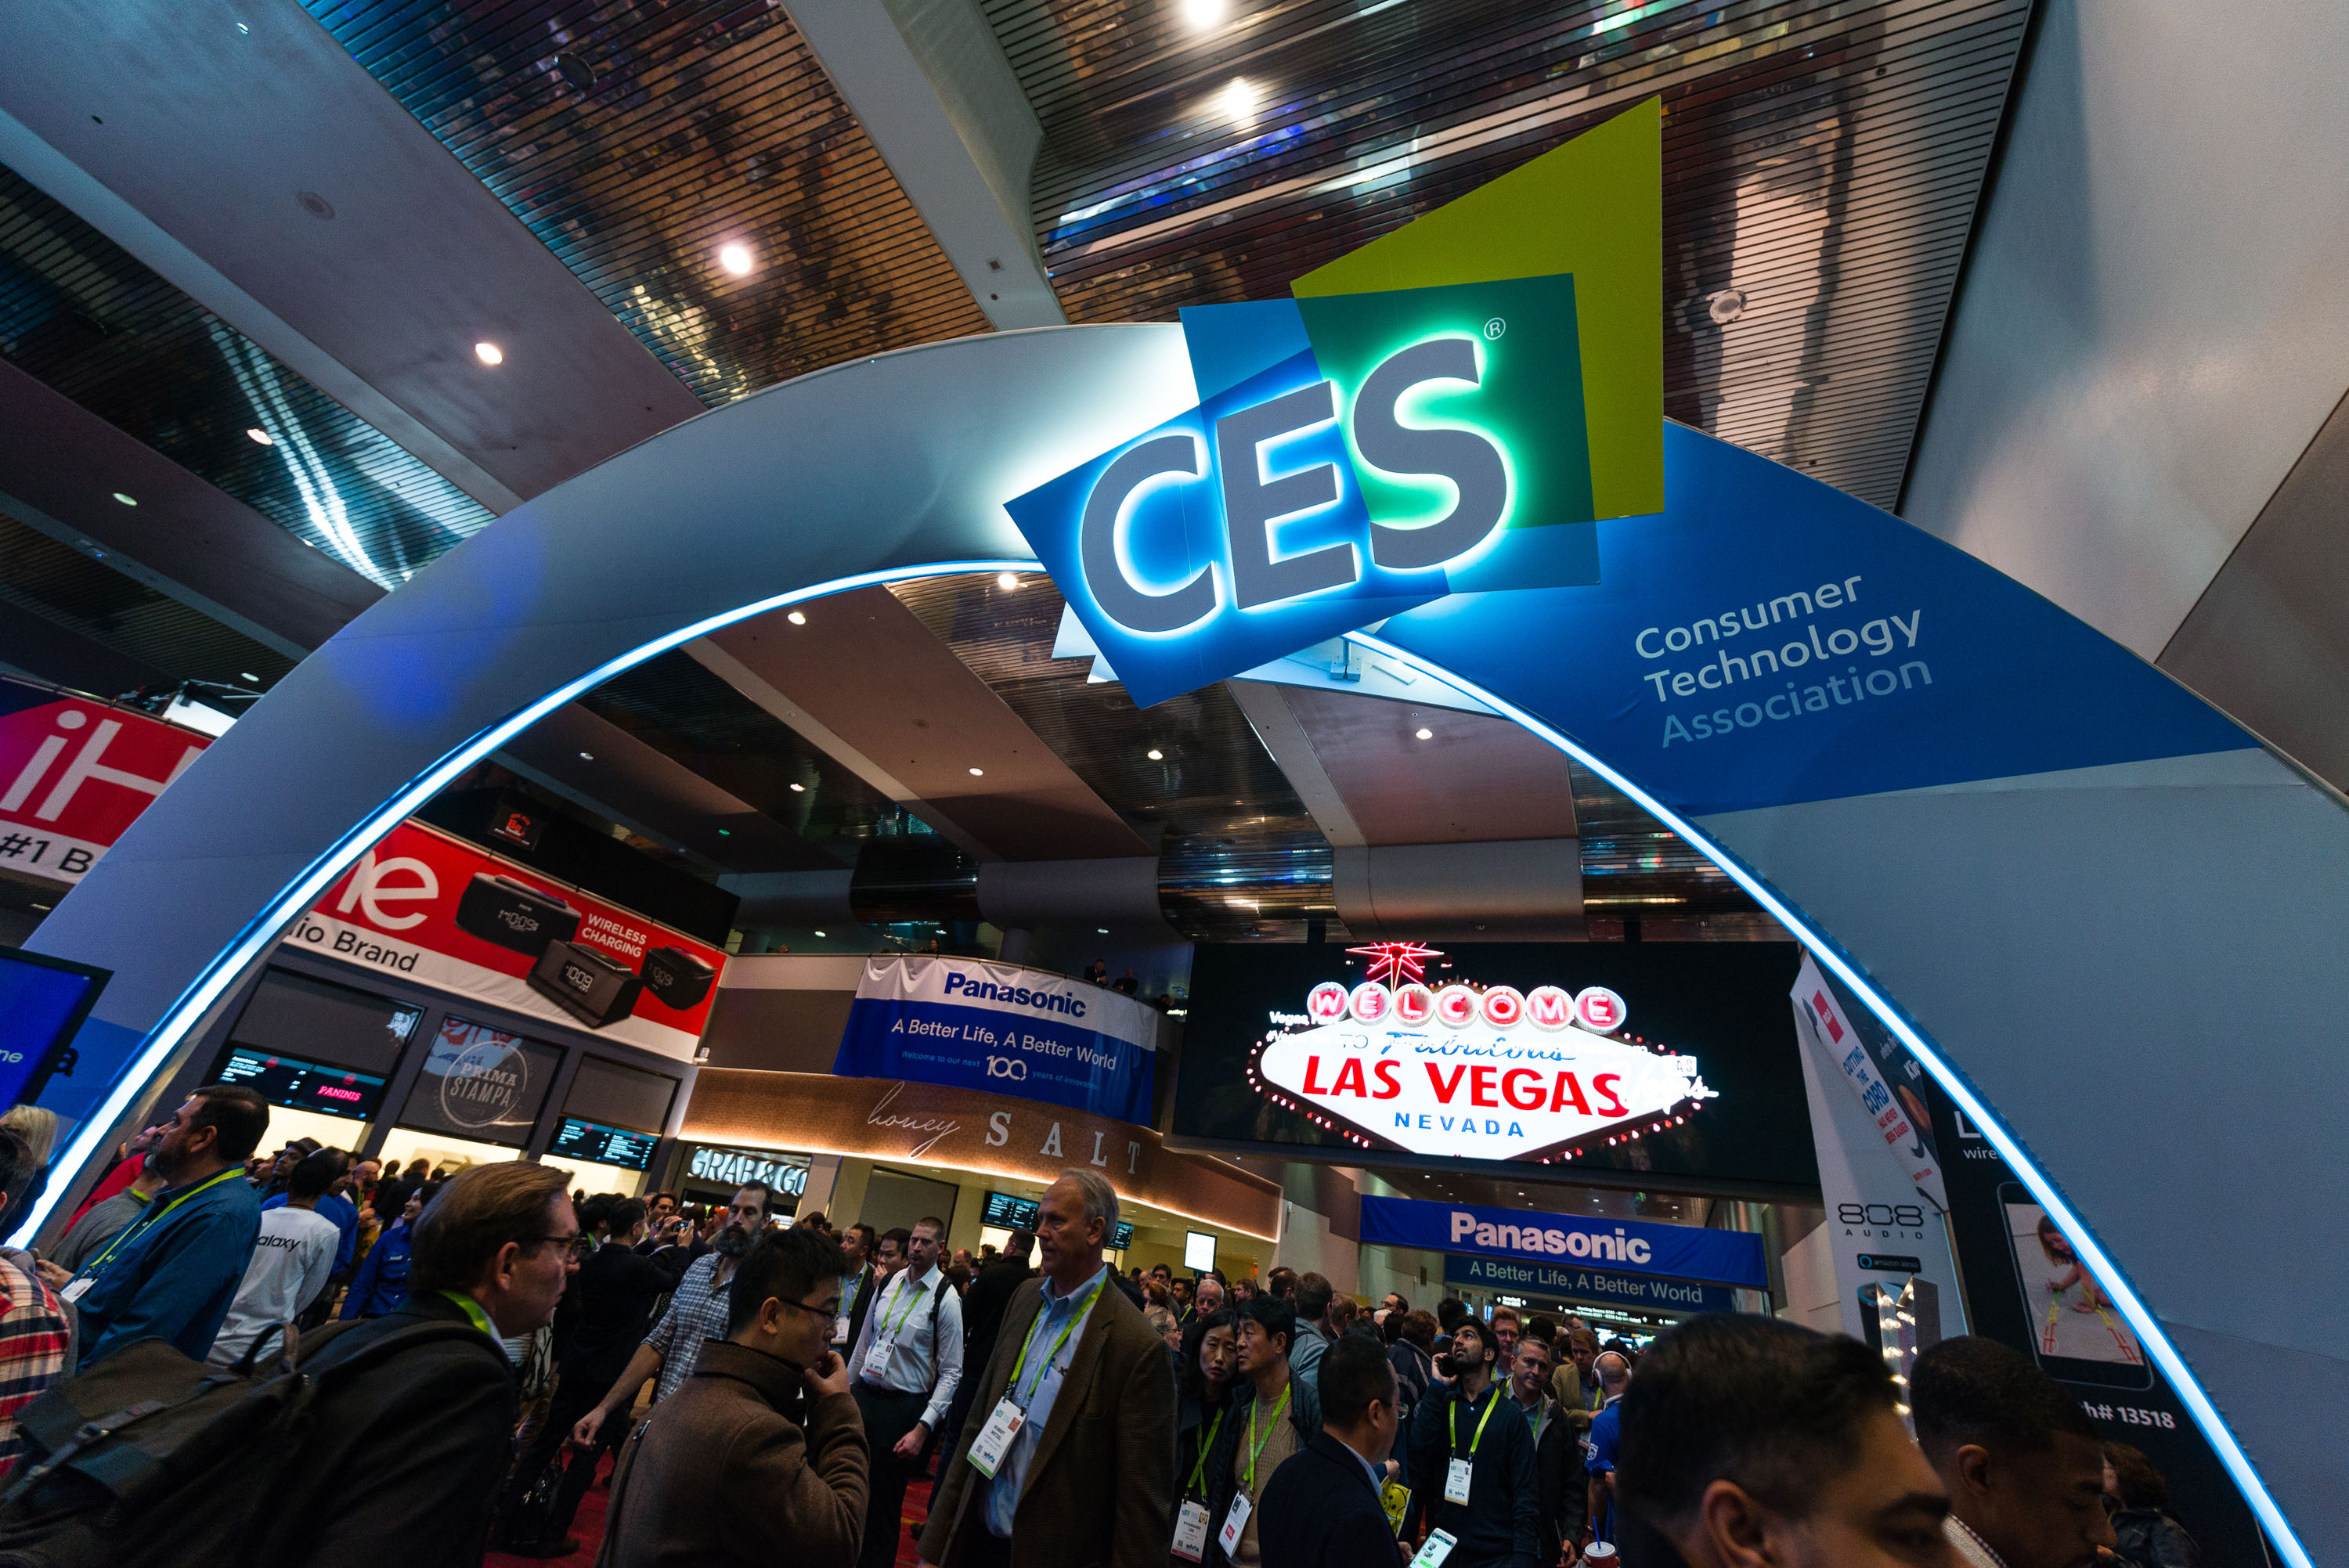 Success at CES 2019: How to Build Buzz and Stand Out From the Crowd